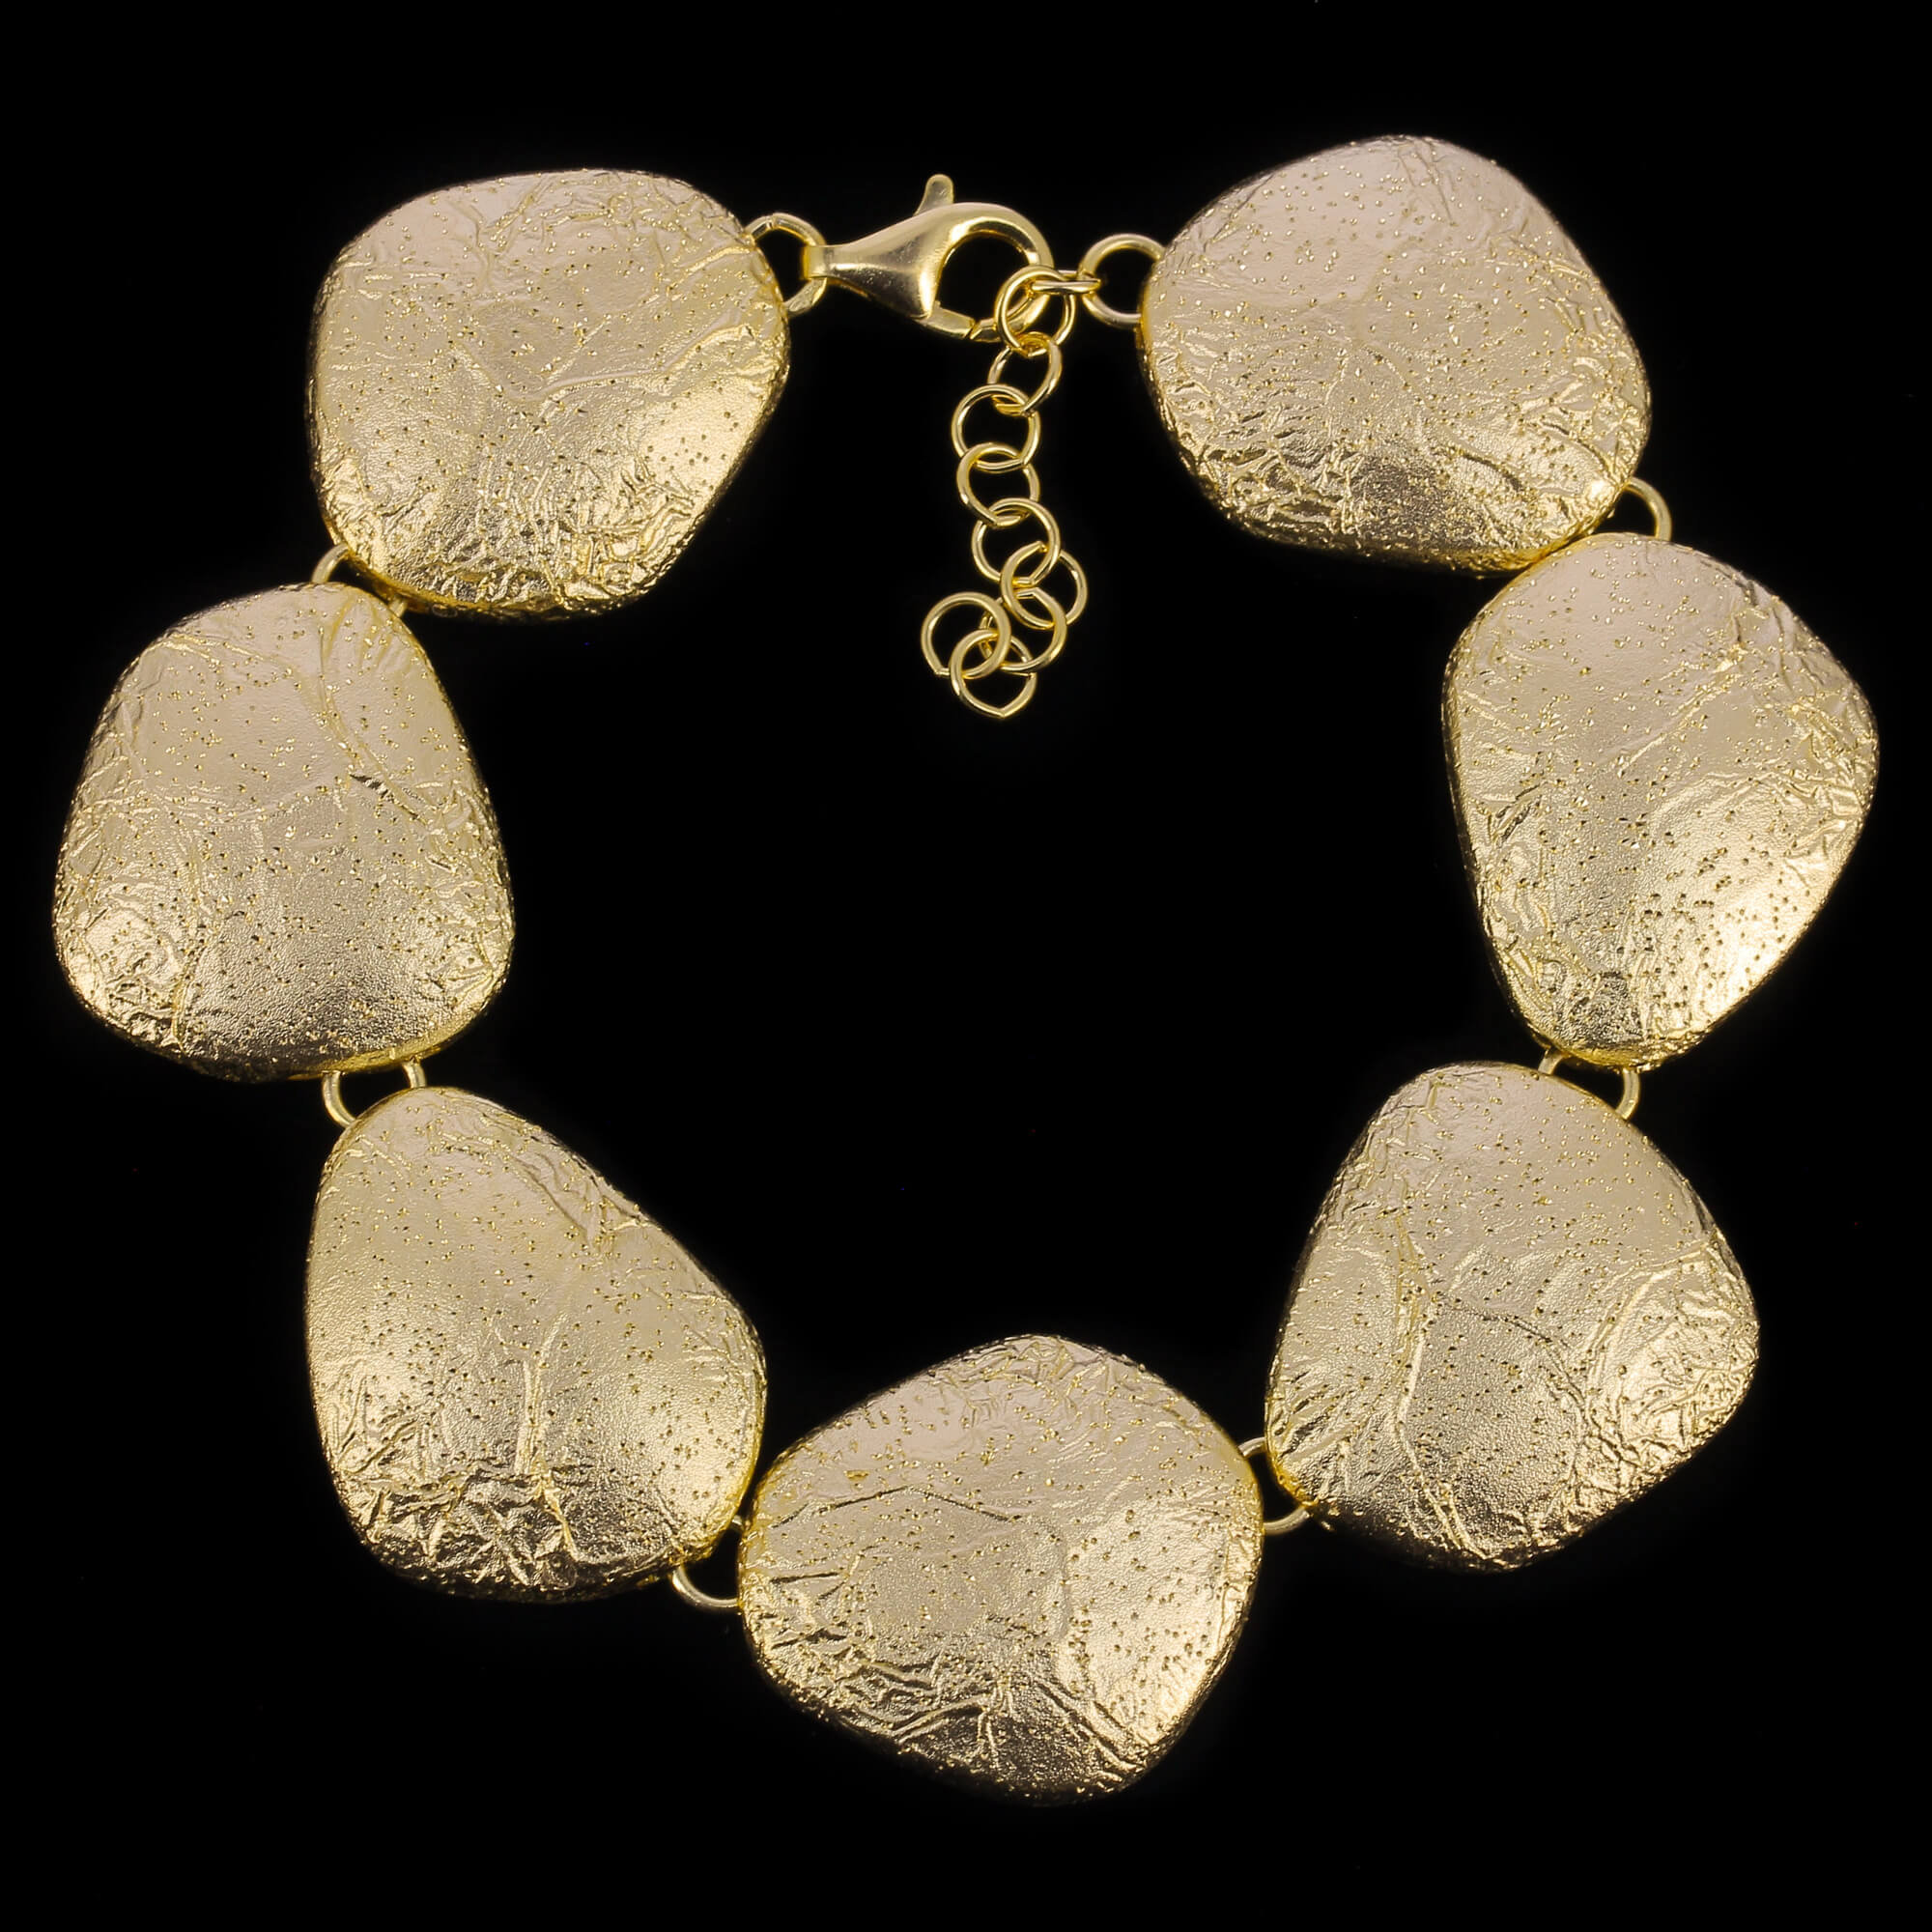 Gold-plated and beautiful bracelet with coffee bean designs